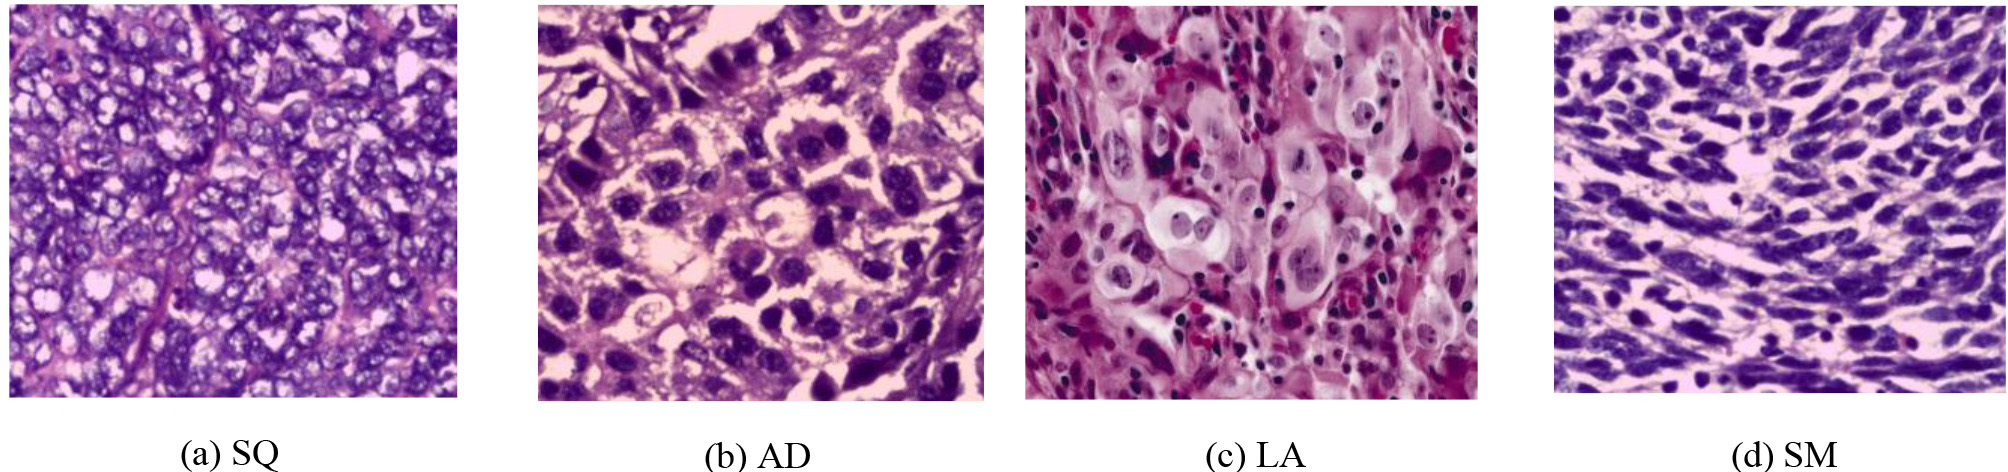 Pathological section of four types of typical lung cancer tissues (he, 50x).